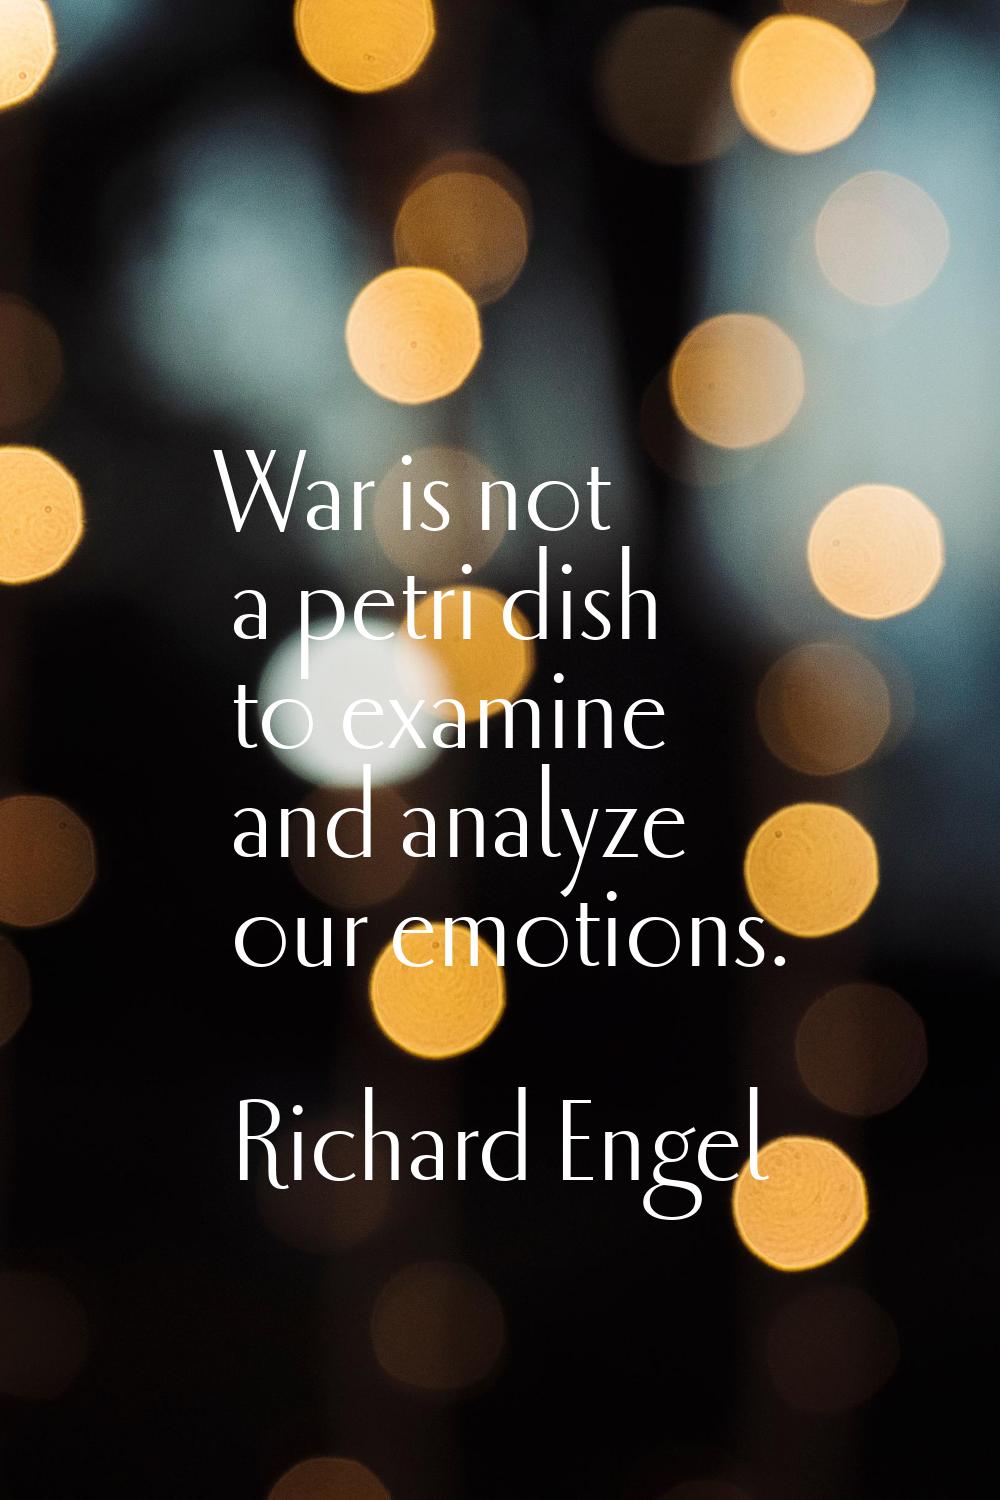 War is not a petri dish to examine and analyze our emotions.